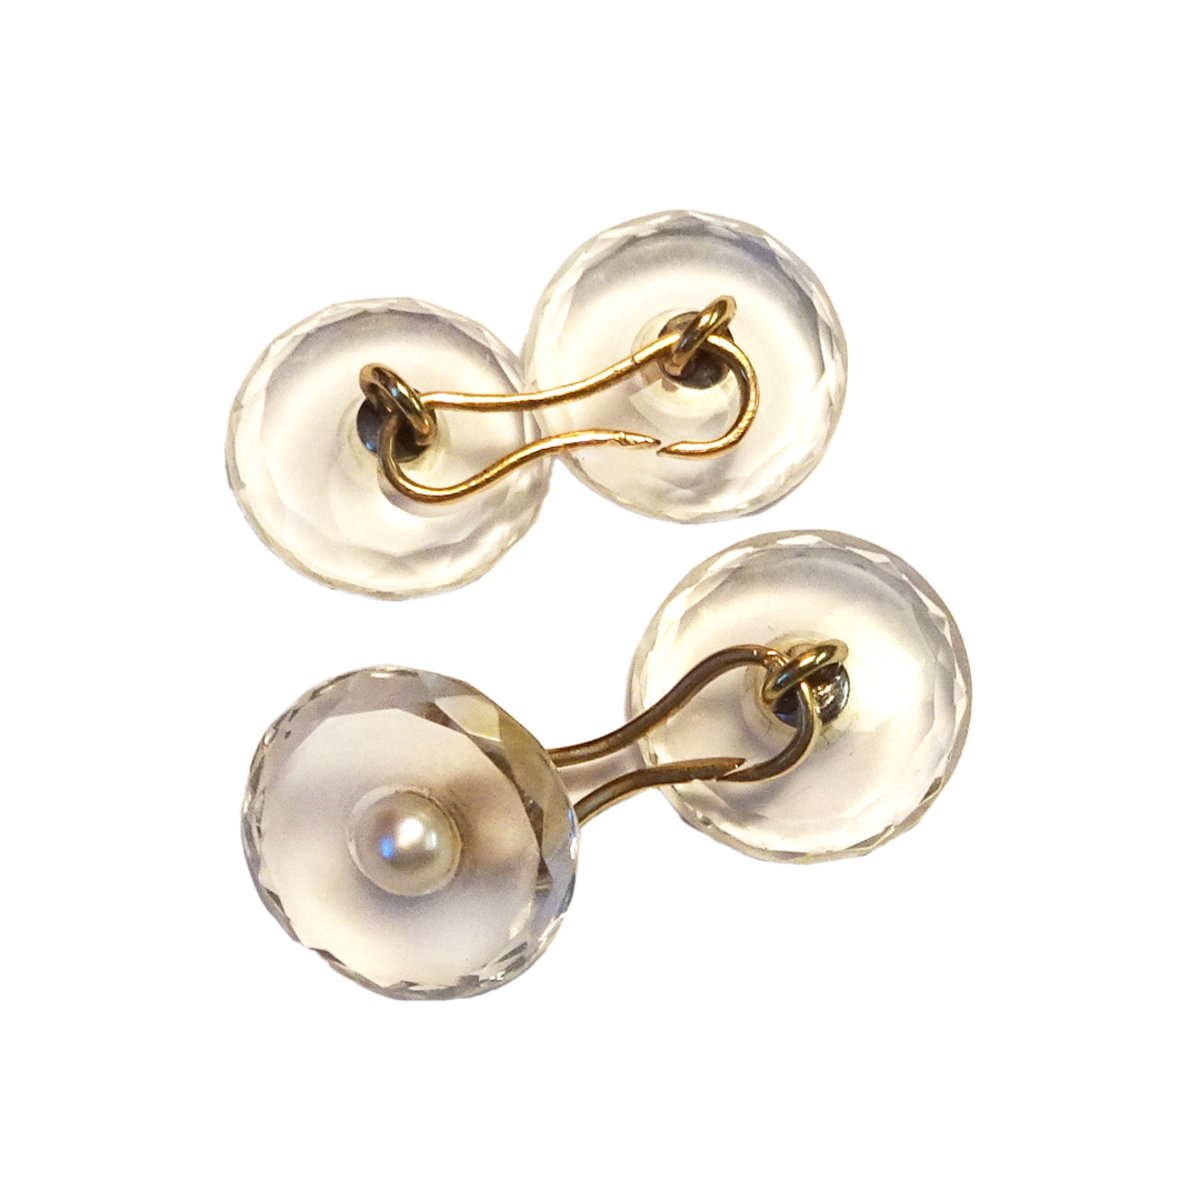 Art Deco 18KT Yellow Gold Rock Crystal & Natural Pearl Cufflinks front and back